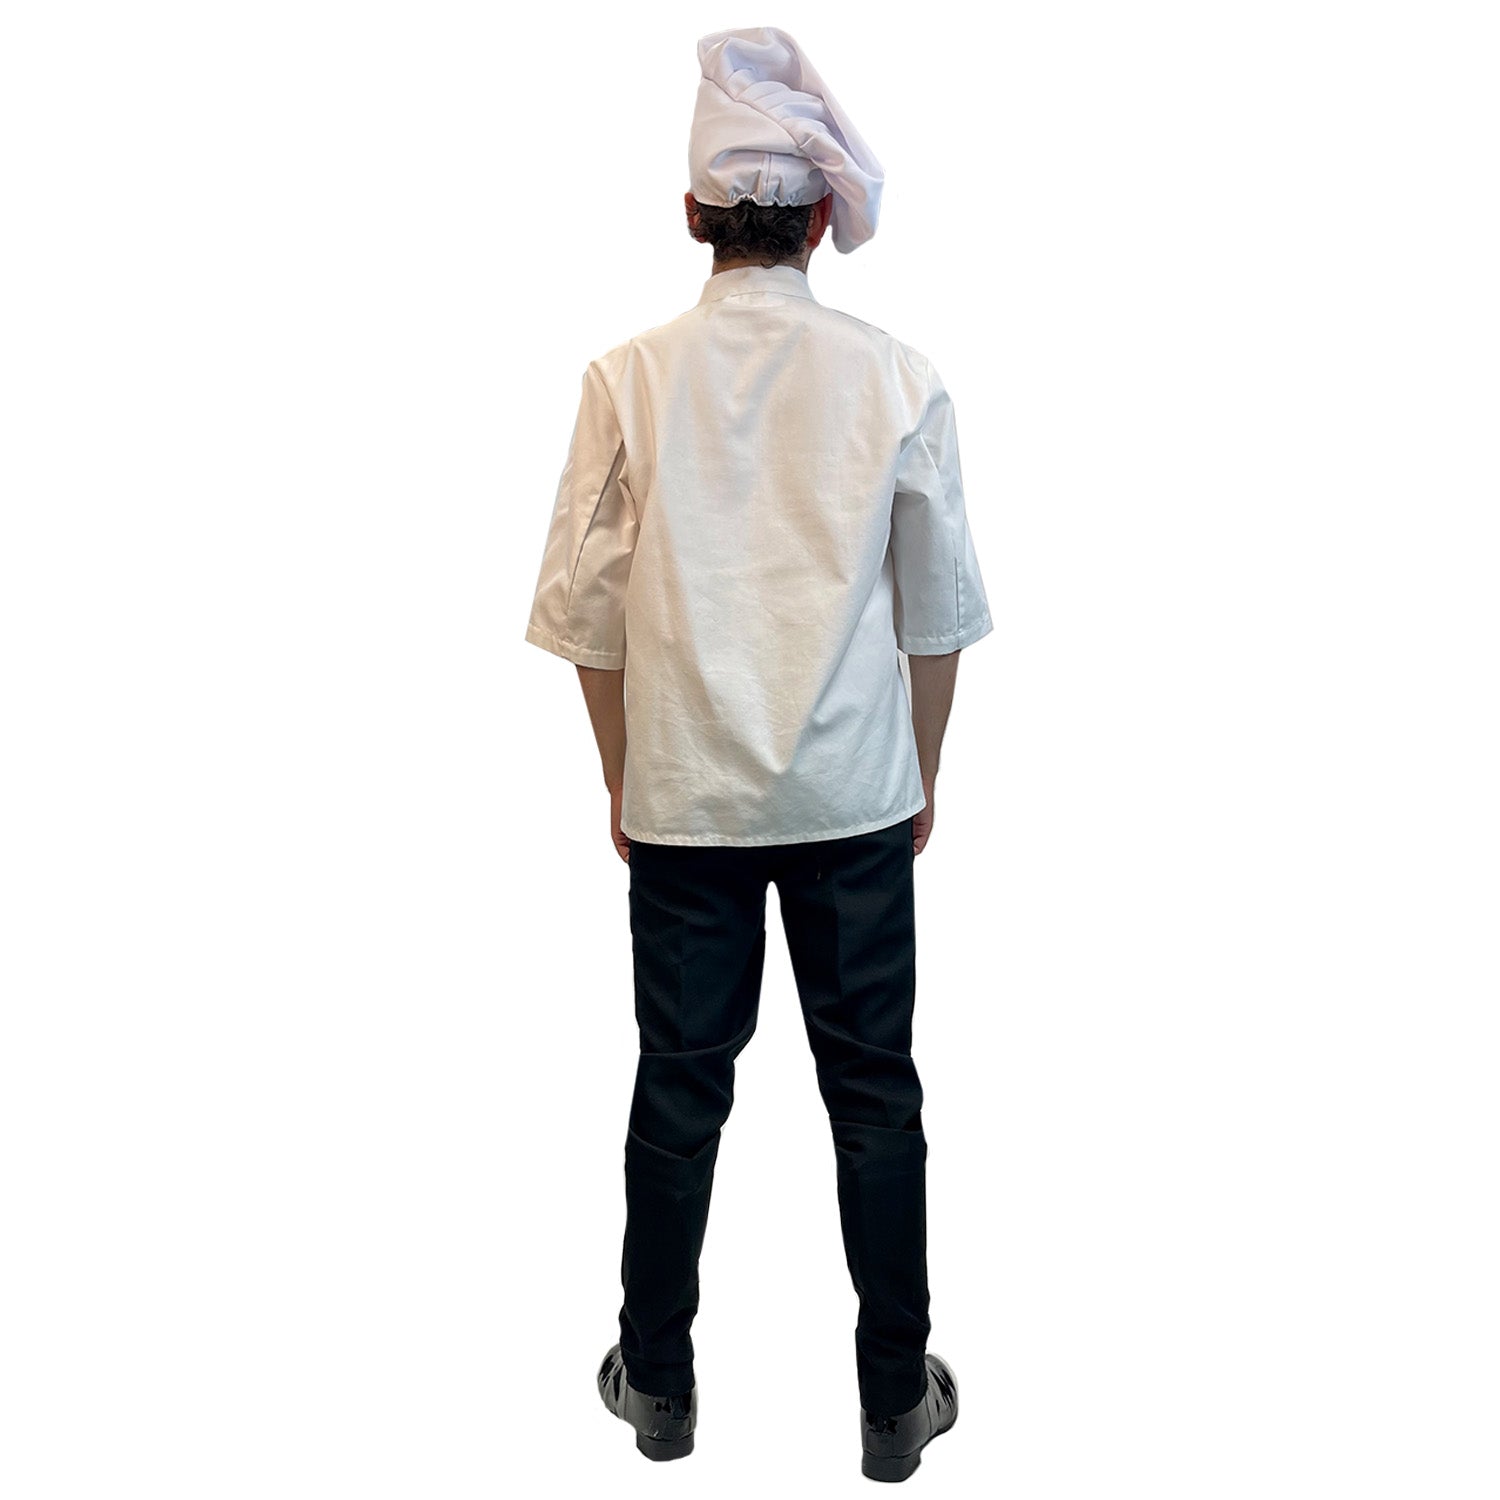 Sous Chef Adult Costume